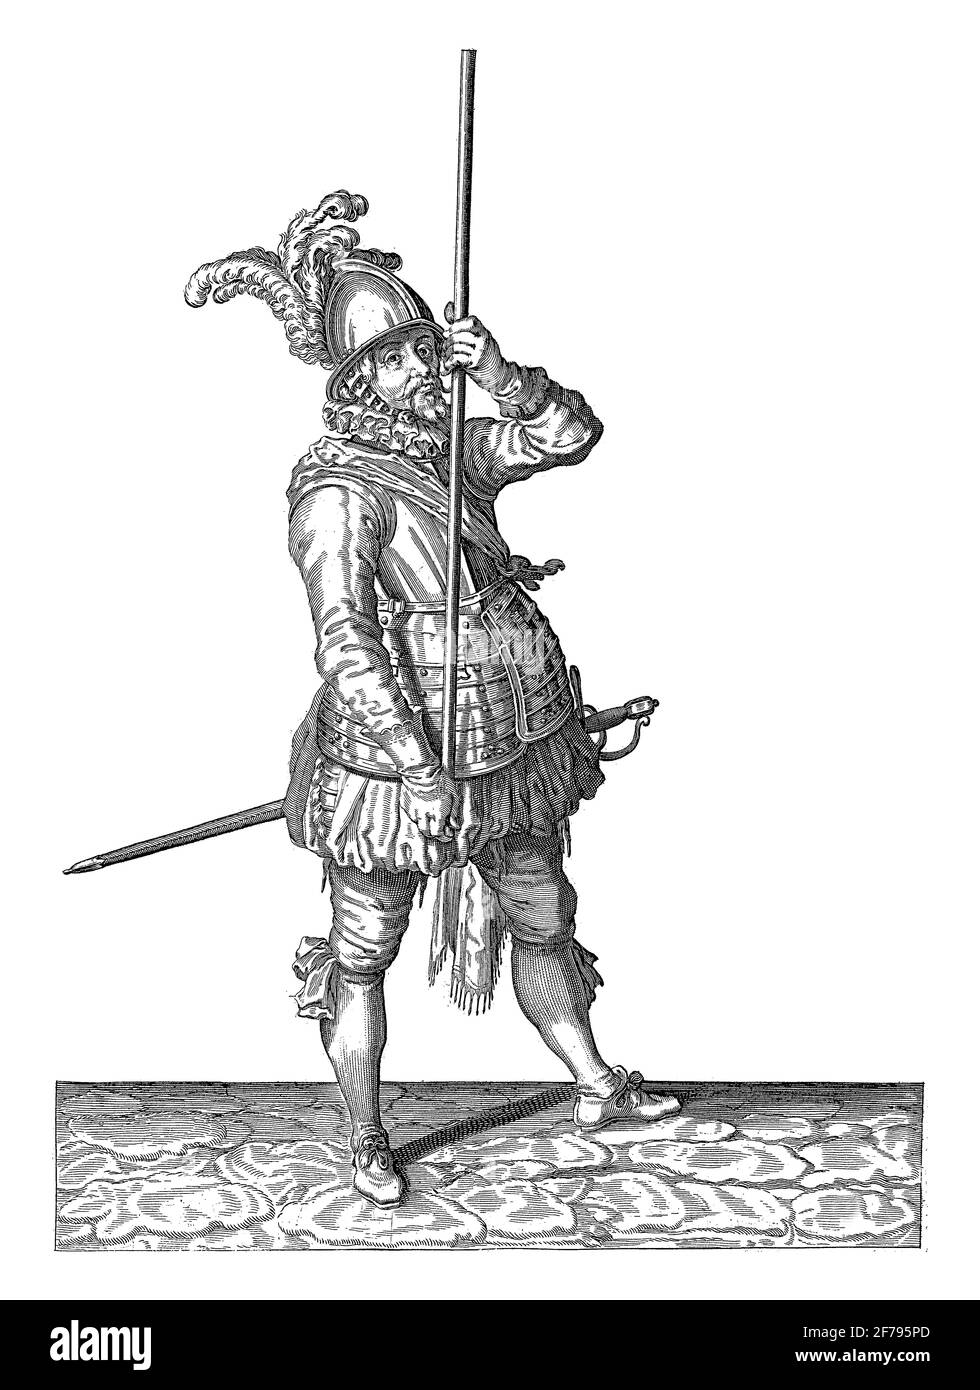 A Soldier, full-length, to the right, holding a skewer (lance) with both hands upright high above the ground, vintage engraving. Stock Photo